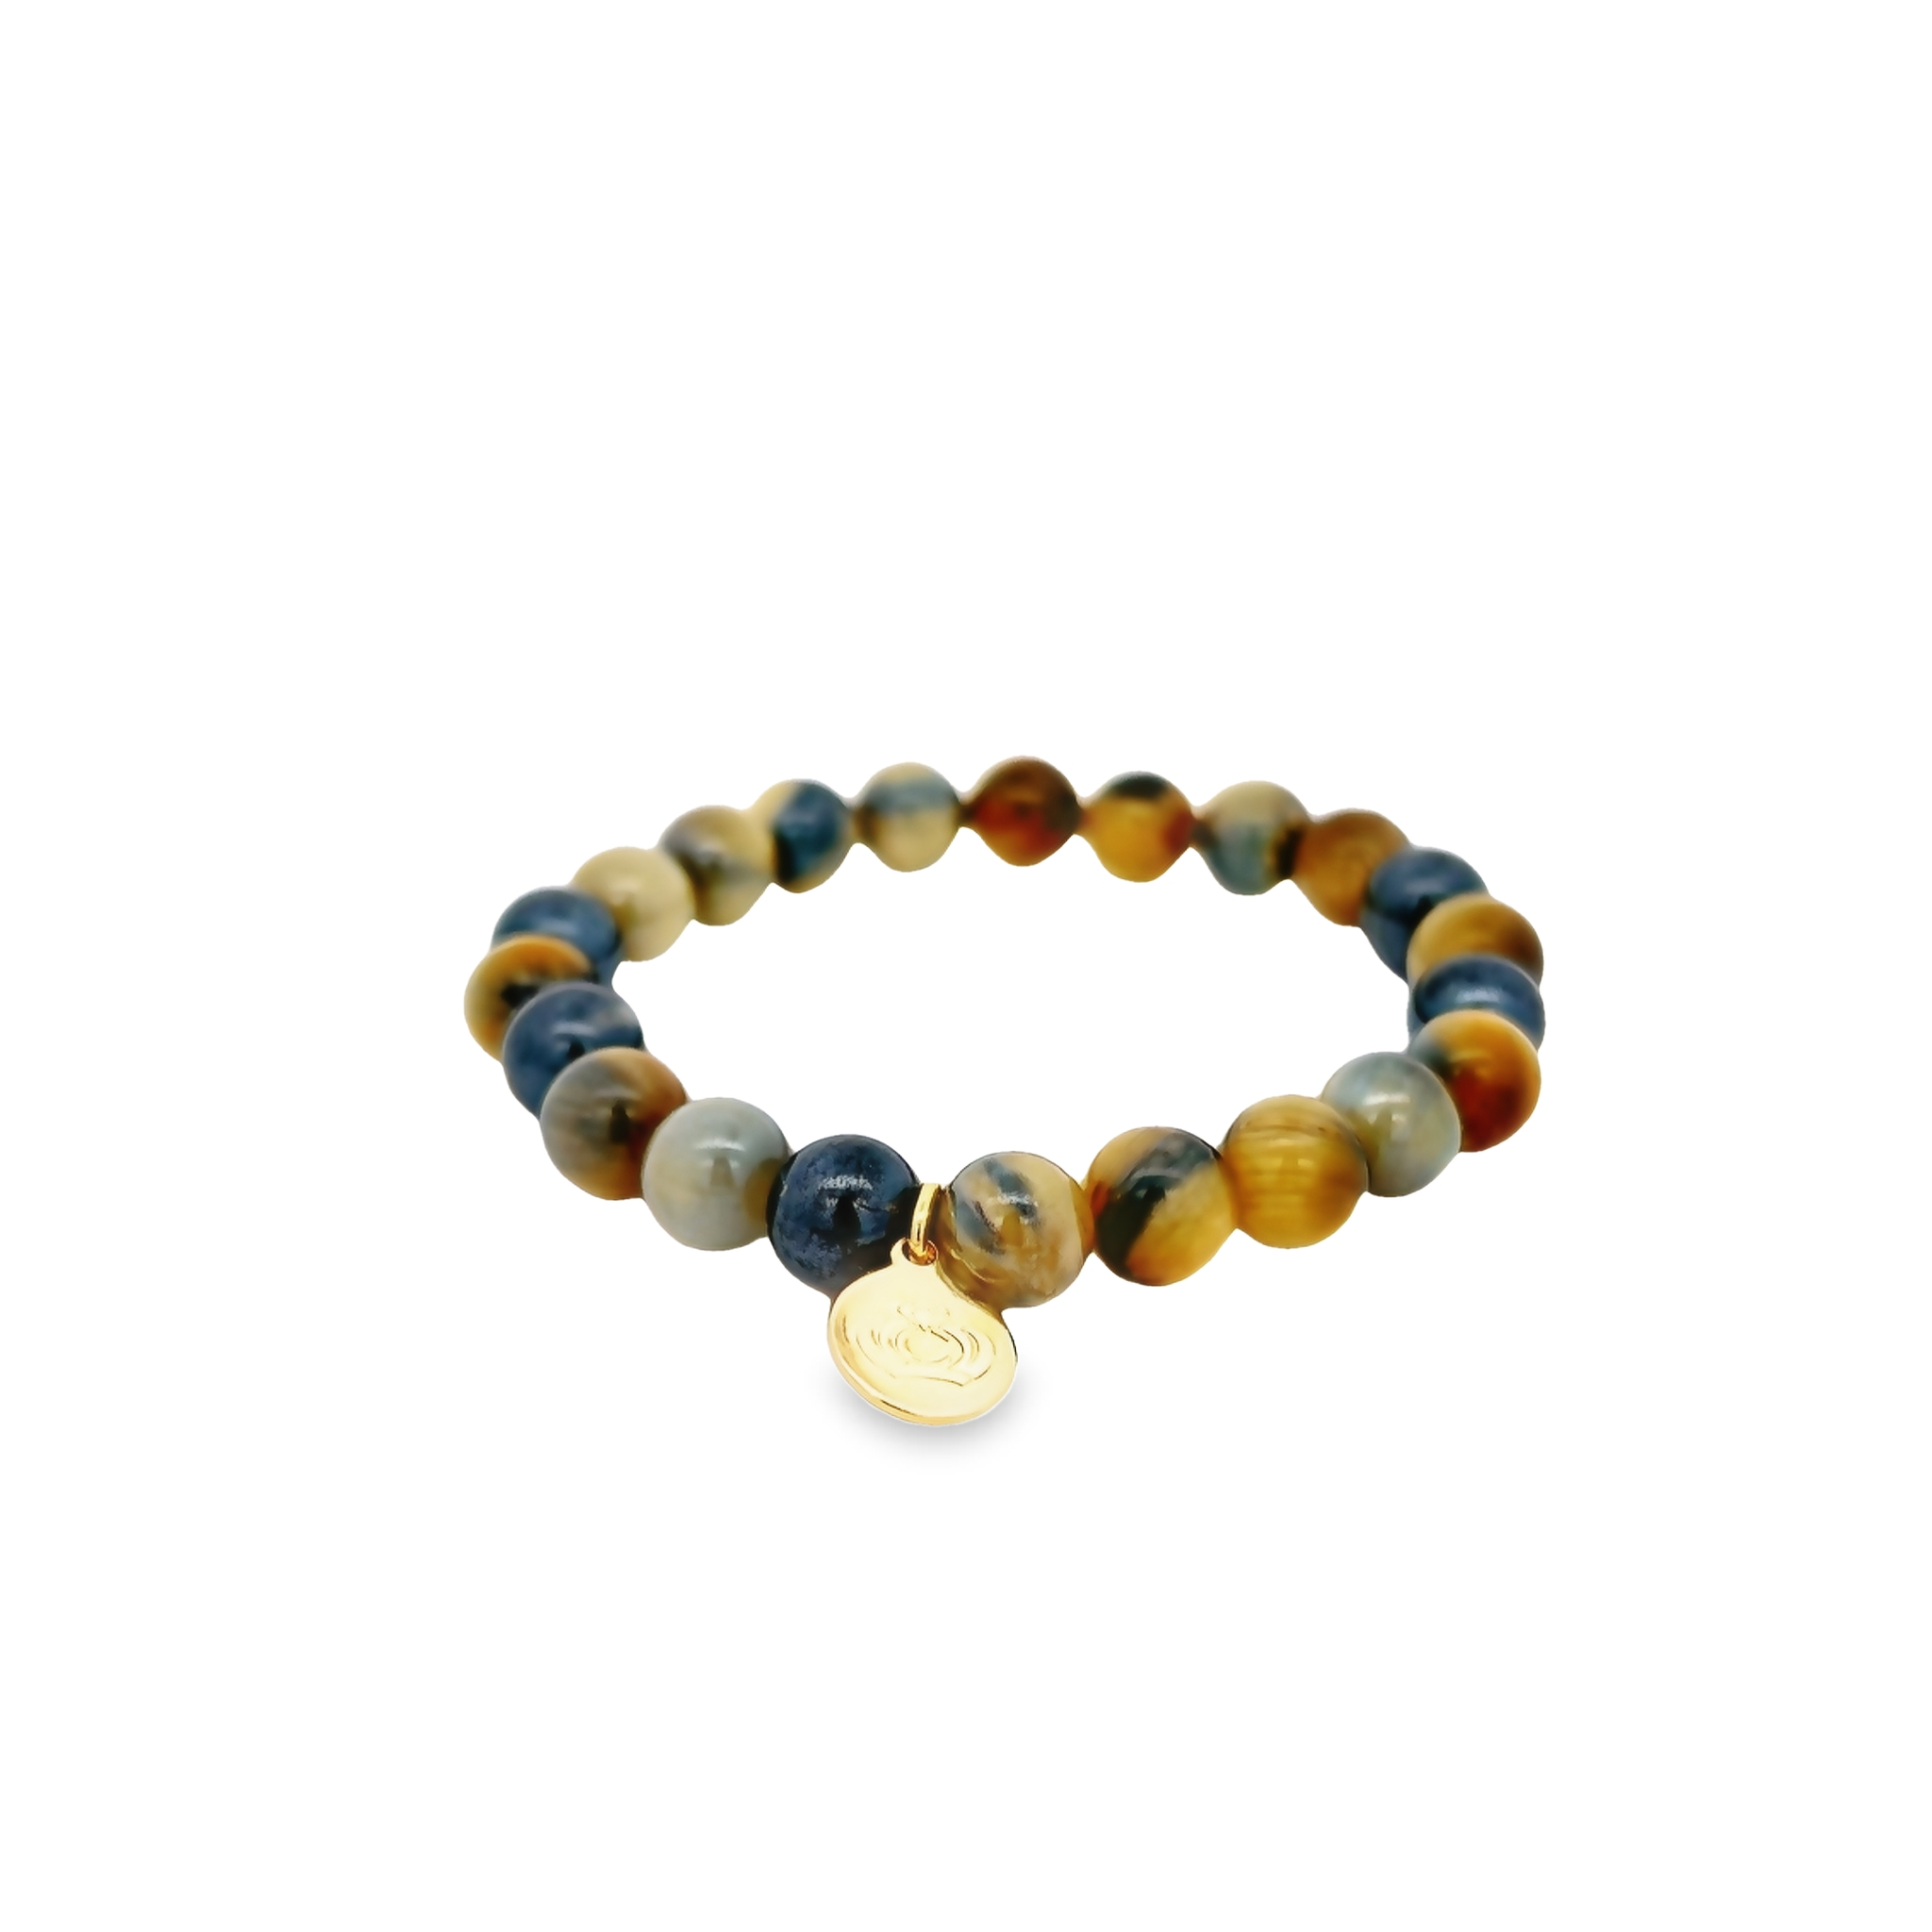 8mm Tigers Eye Bead Bracelet For The Boys And Girls Clubs Of Frederick County.